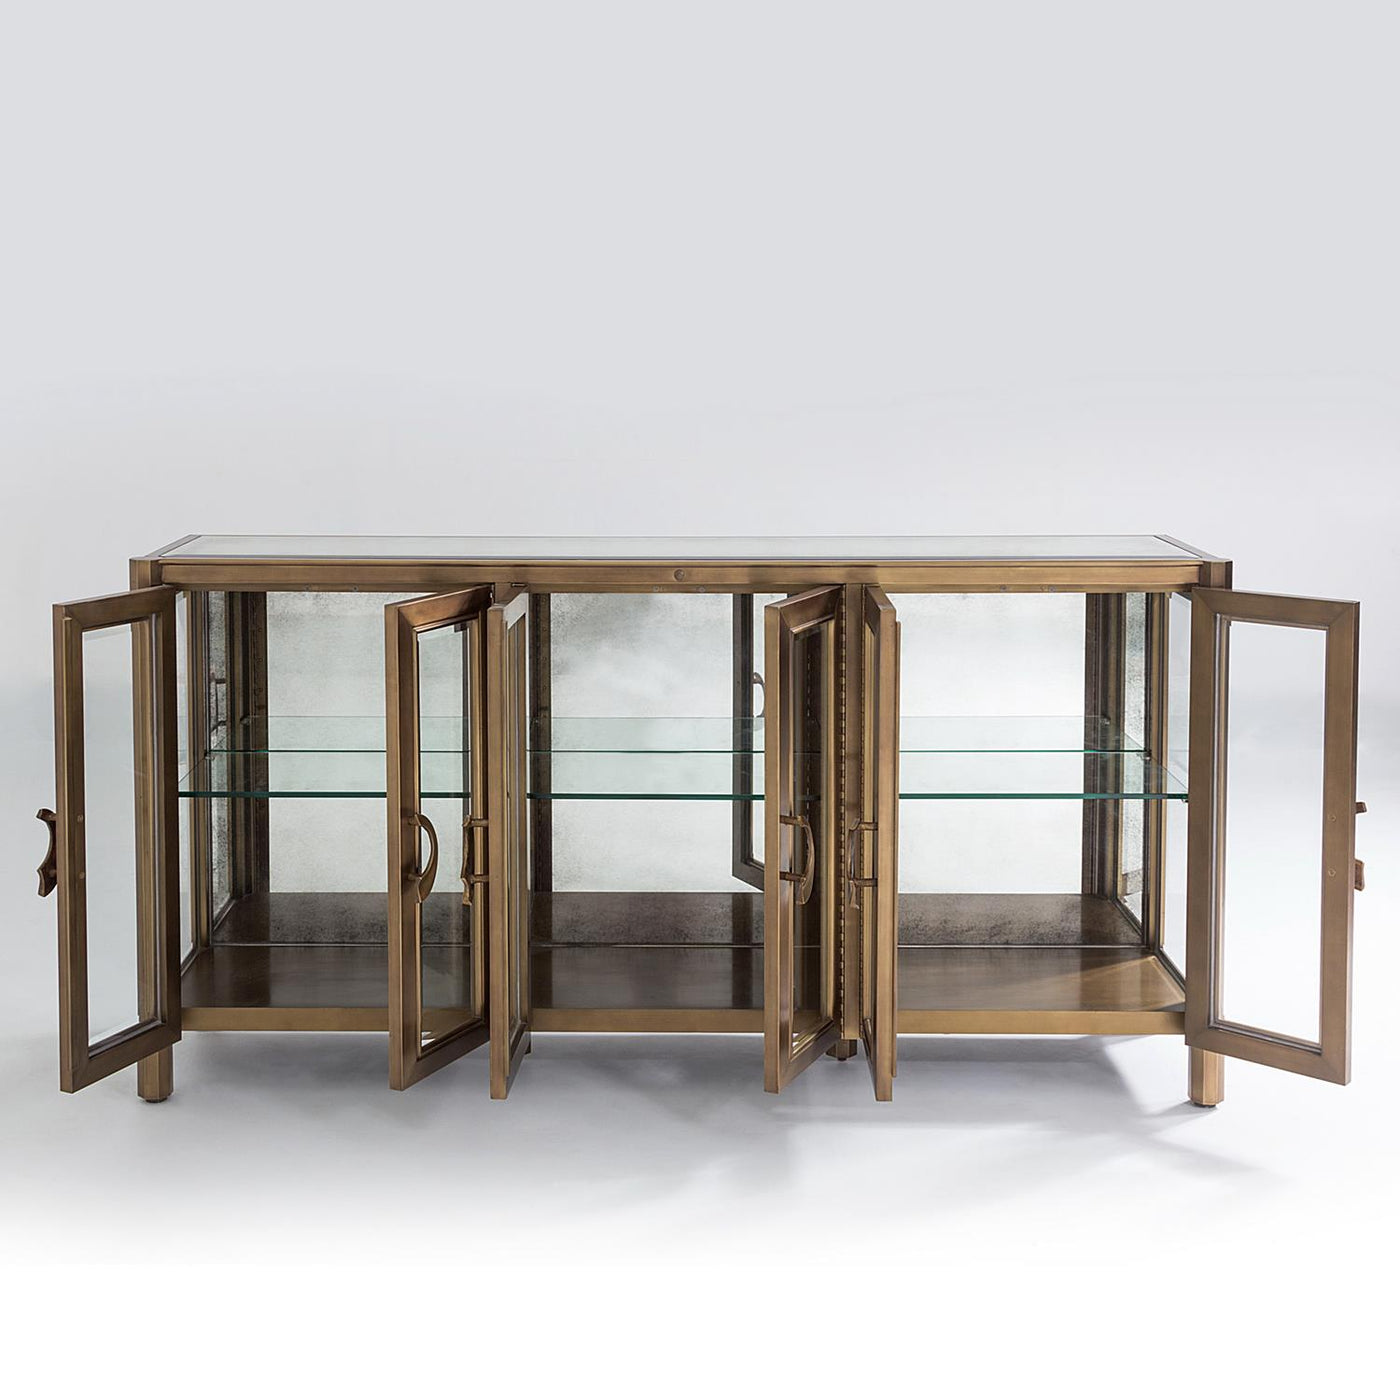 APOTHECARY CONSOLE CABINET by Global Views